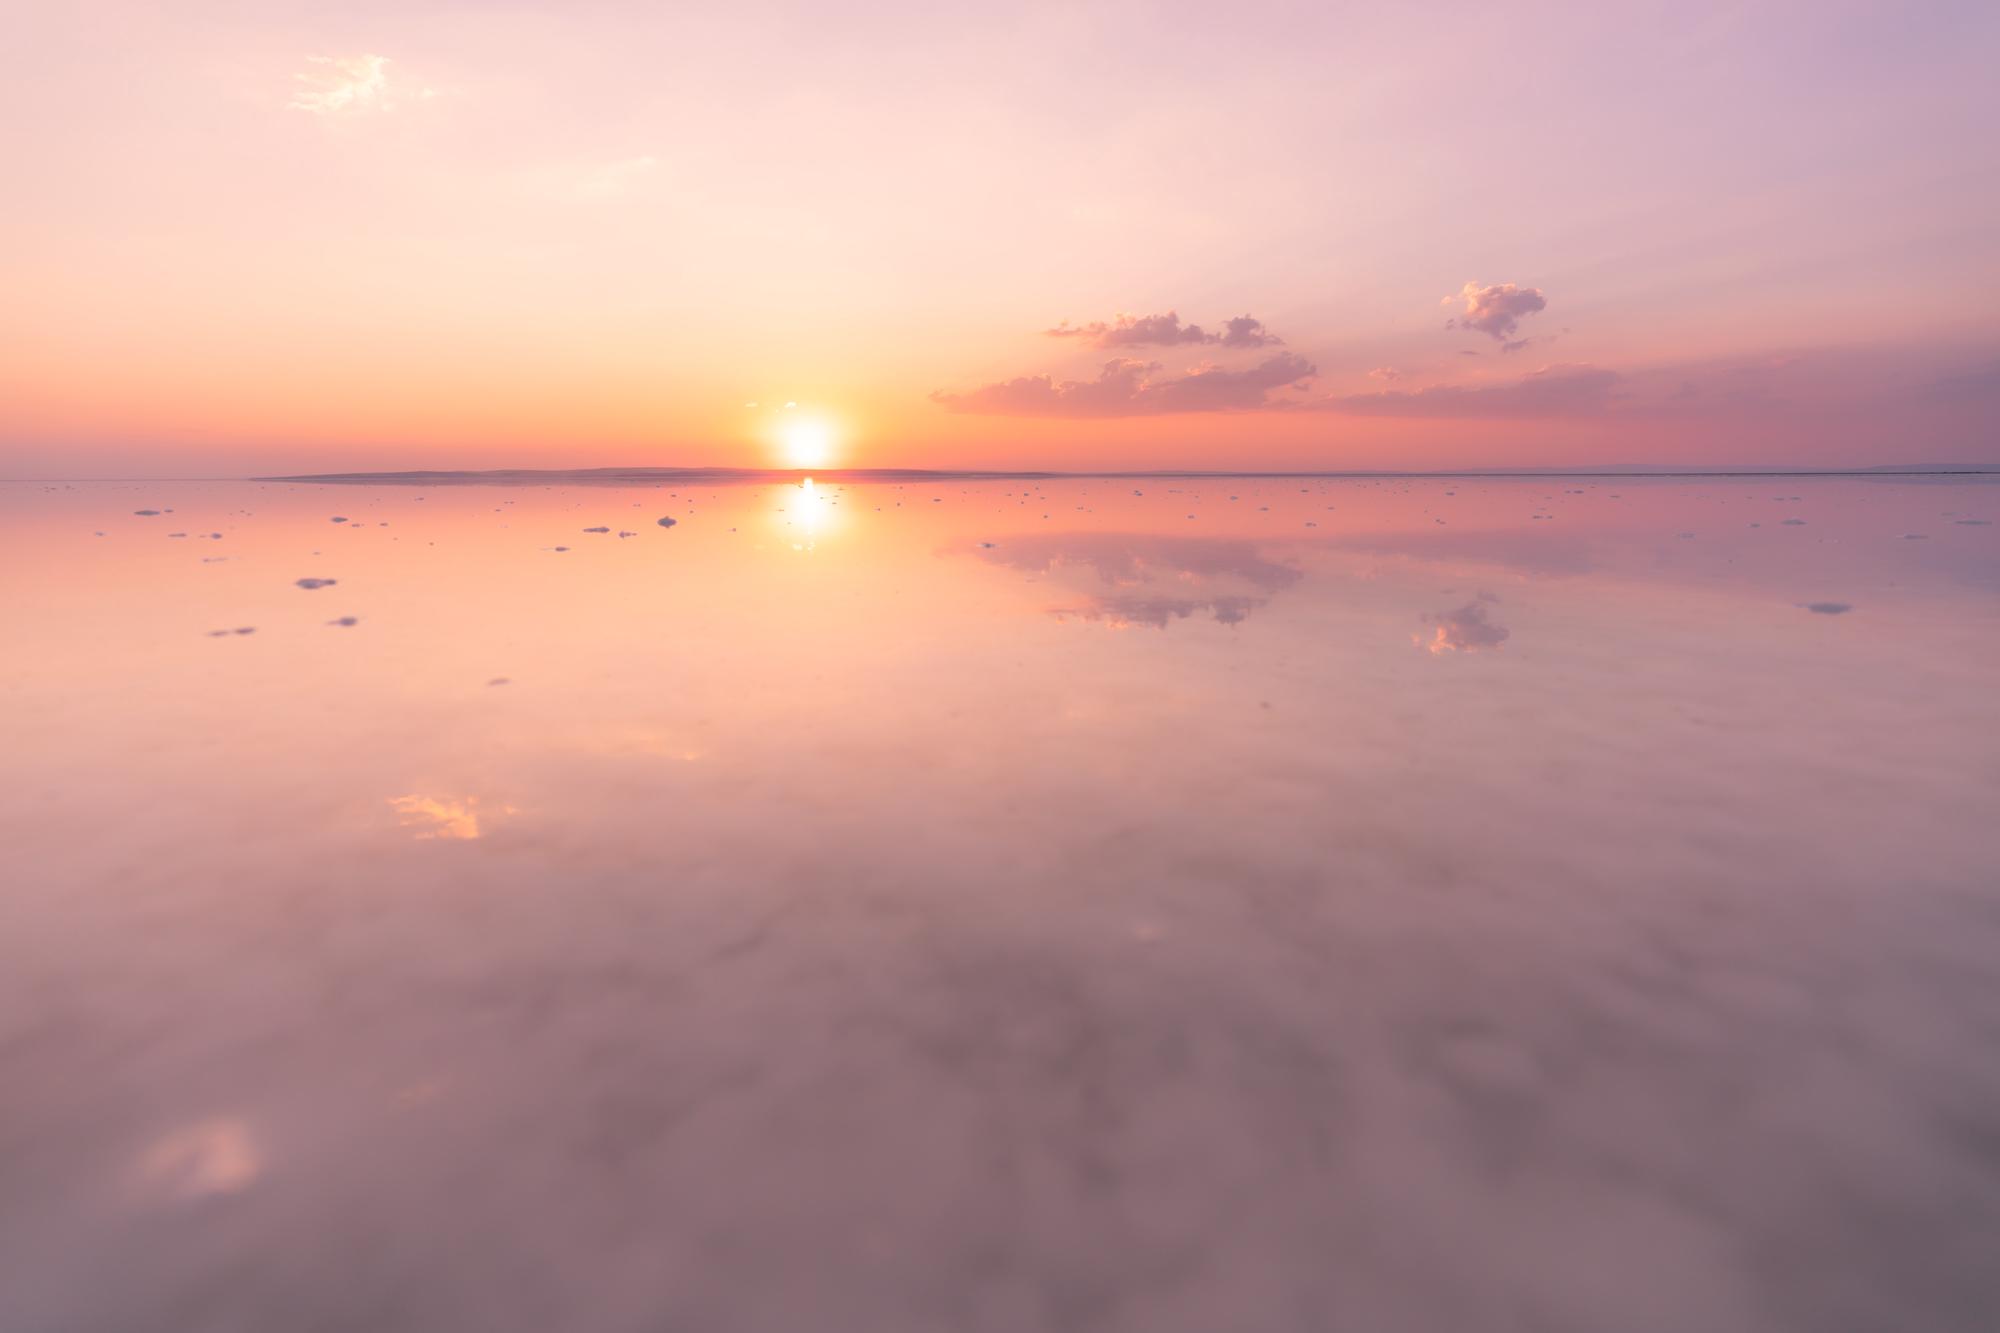 A Ginormous salt lake reflecting like a mirror in Turkey at sunset